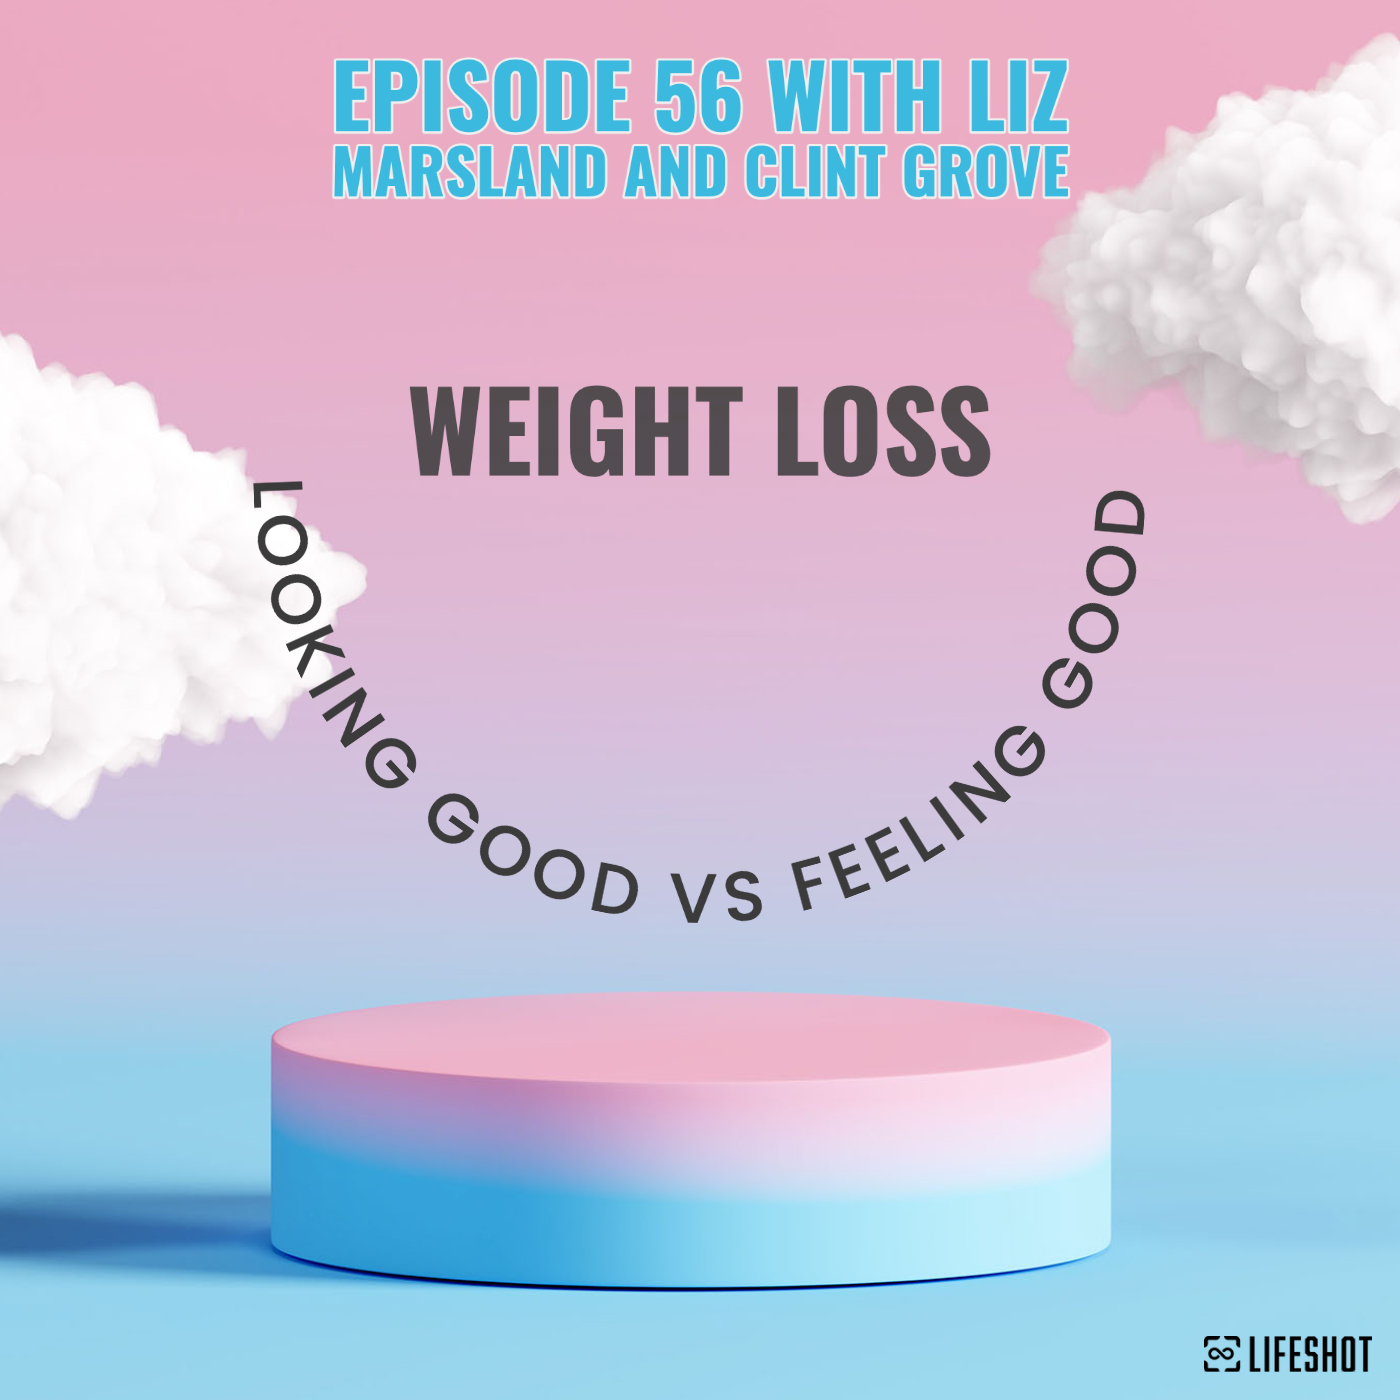 Looking Good or Feeling Good! Why Do You Want To Lose Weight? #56